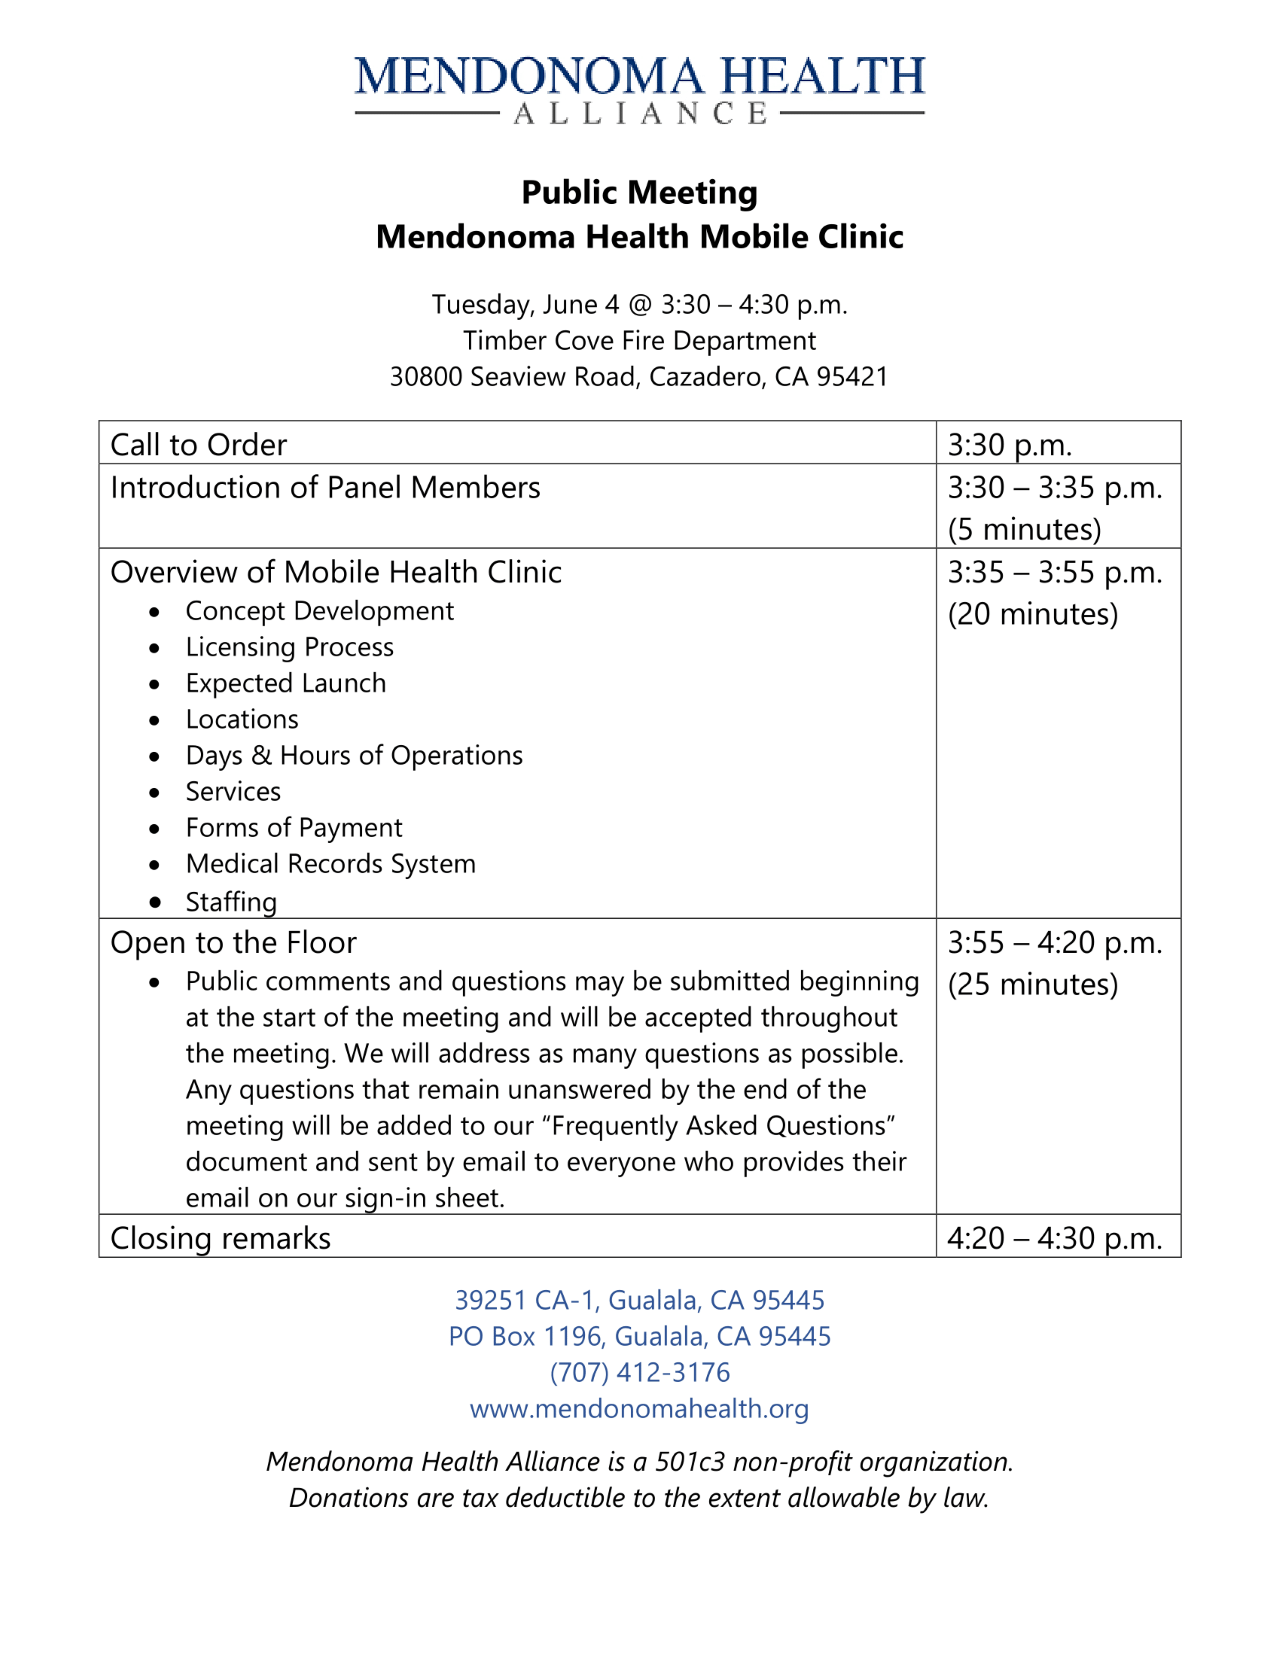 MHA letterhead agenda for upcoming Public Mobile Health Clinic meeting in Timber Cove